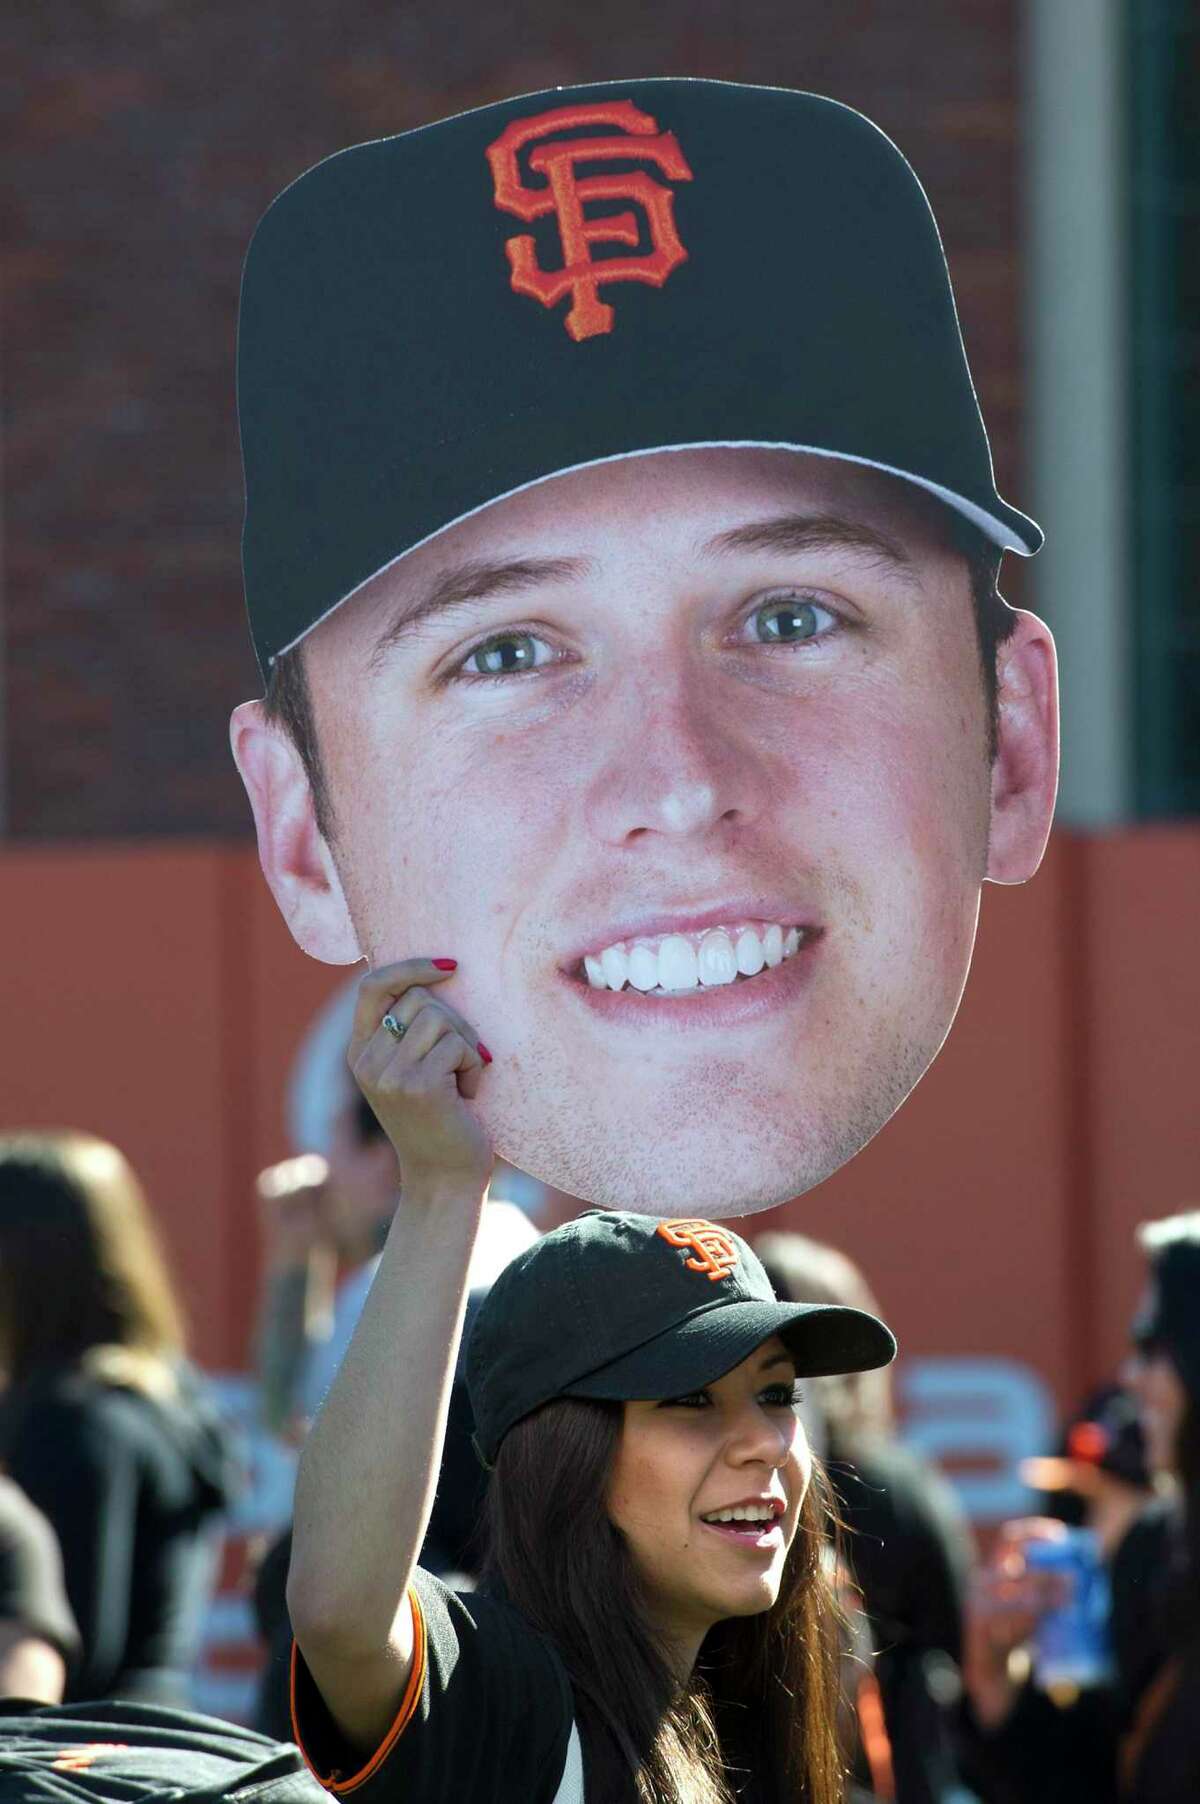 Lily Castillo holds a giant photo of Buster Posey aloft during fan appreciation day at then-AT&T Park in San Francisco on Feb. 9, 2013.